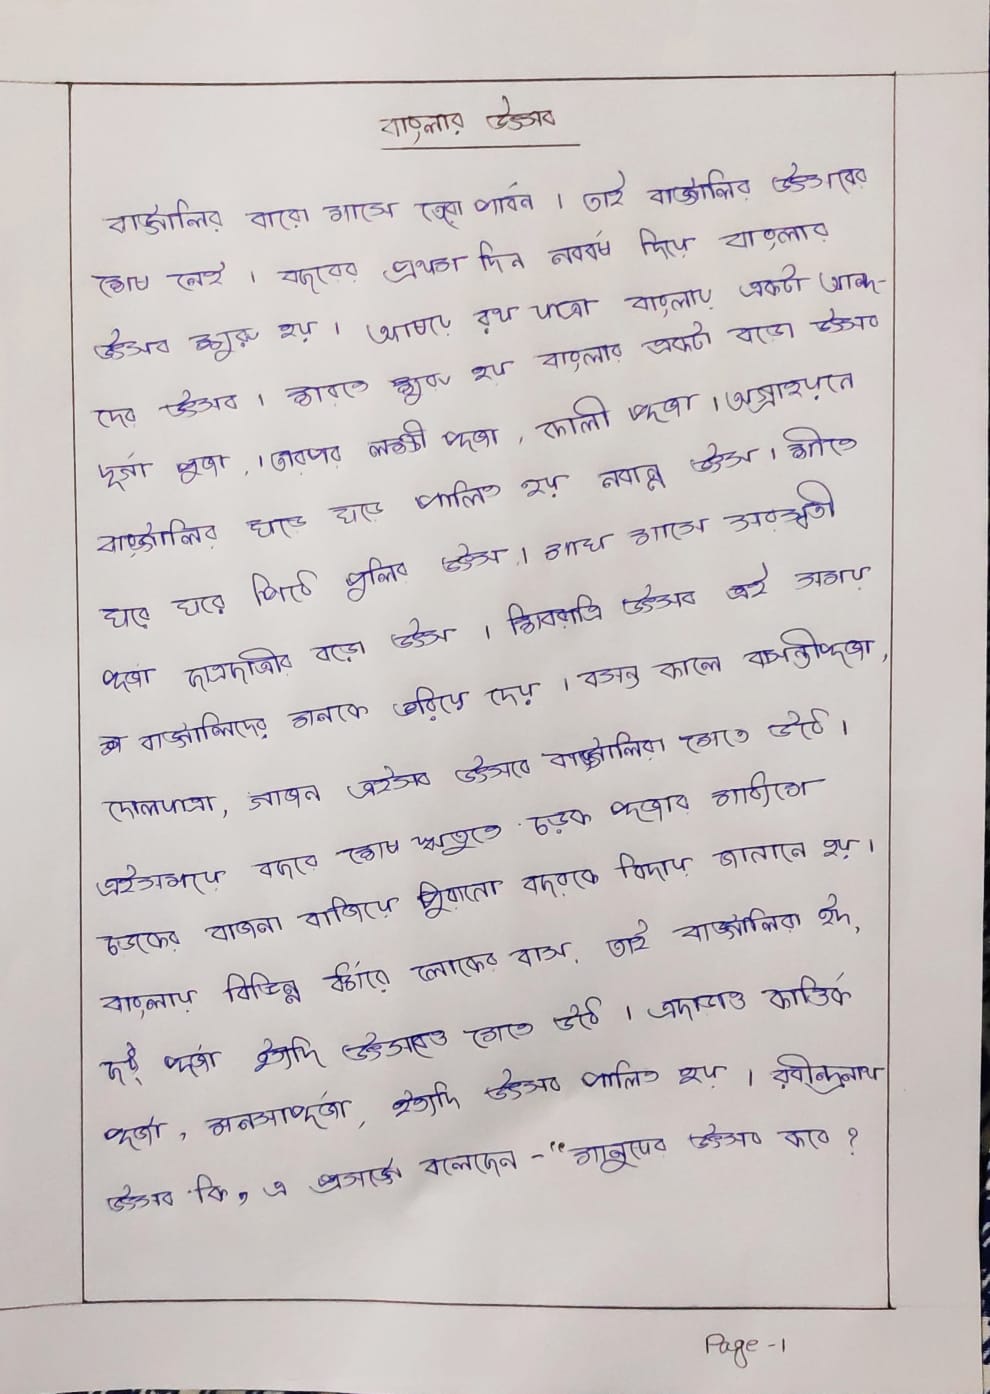 my country essay in bengali